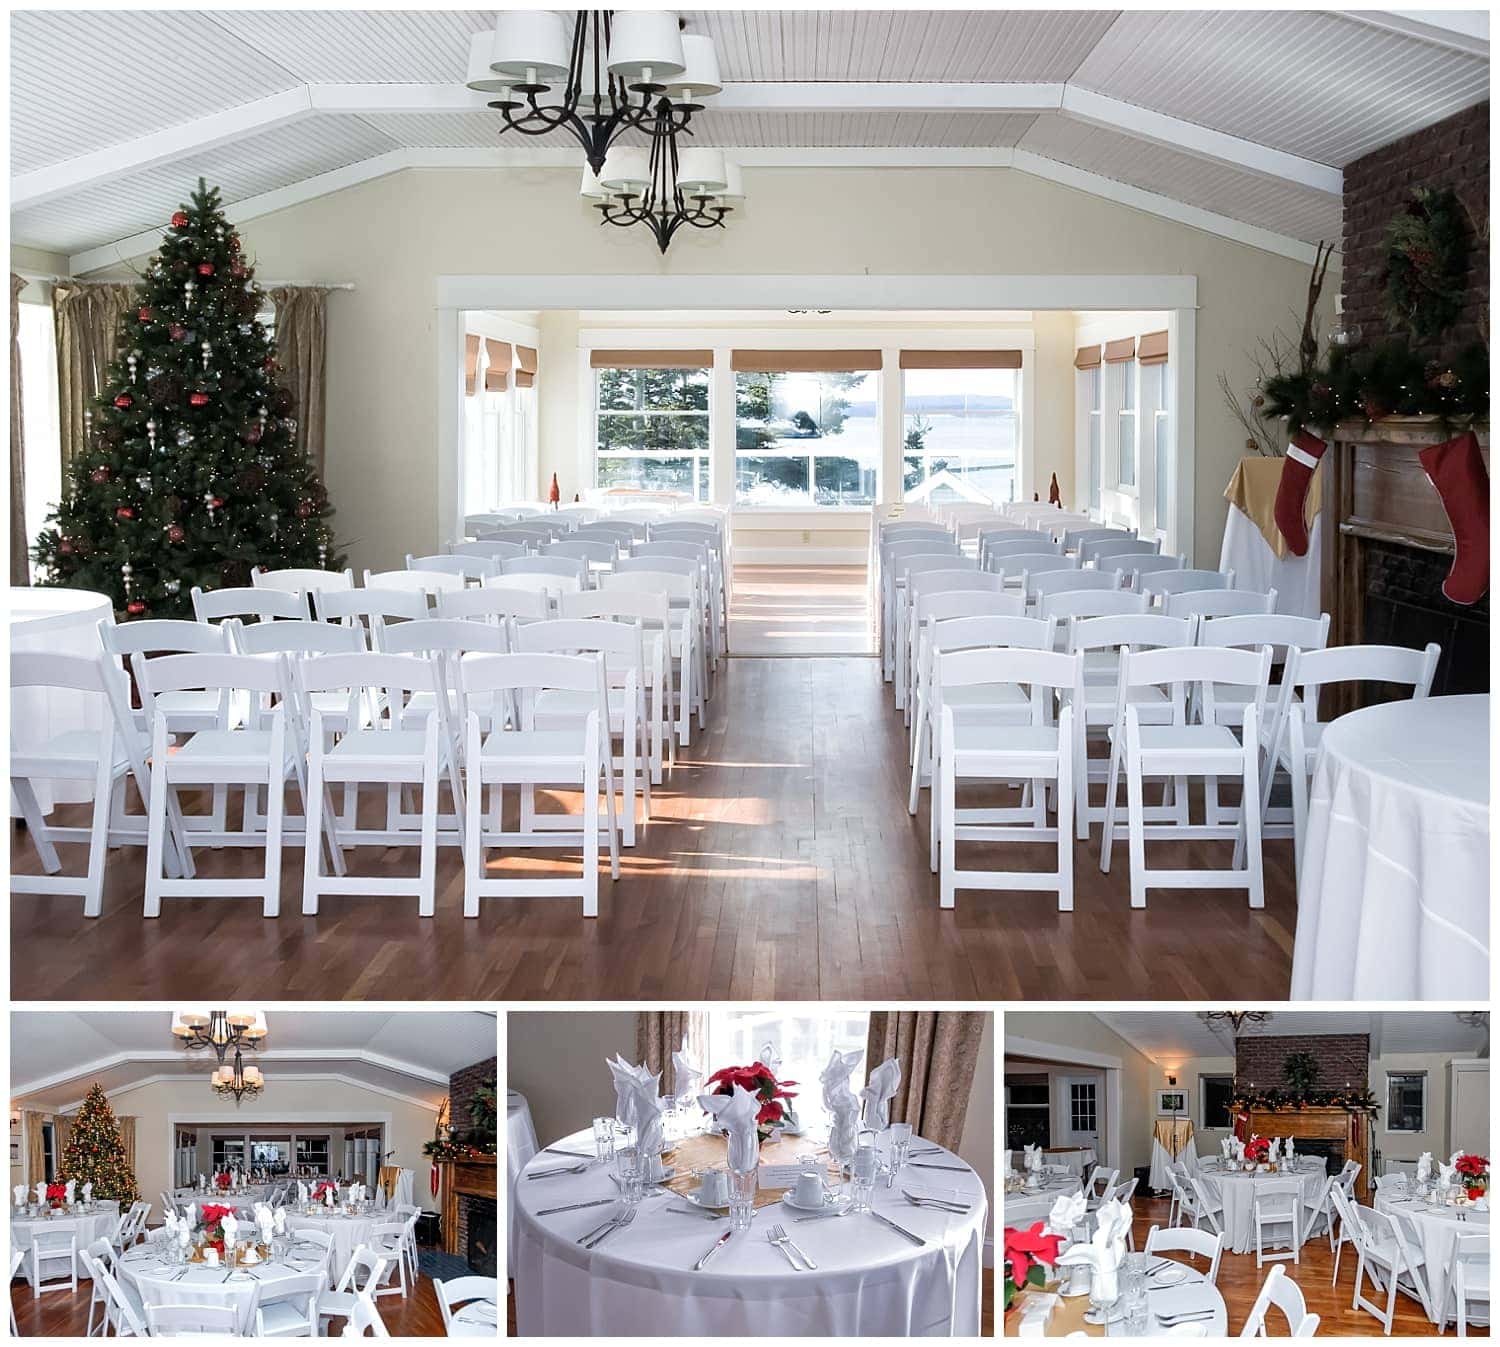 Oceanstone weddings, ceremony and reception set ups for a winter wedding.